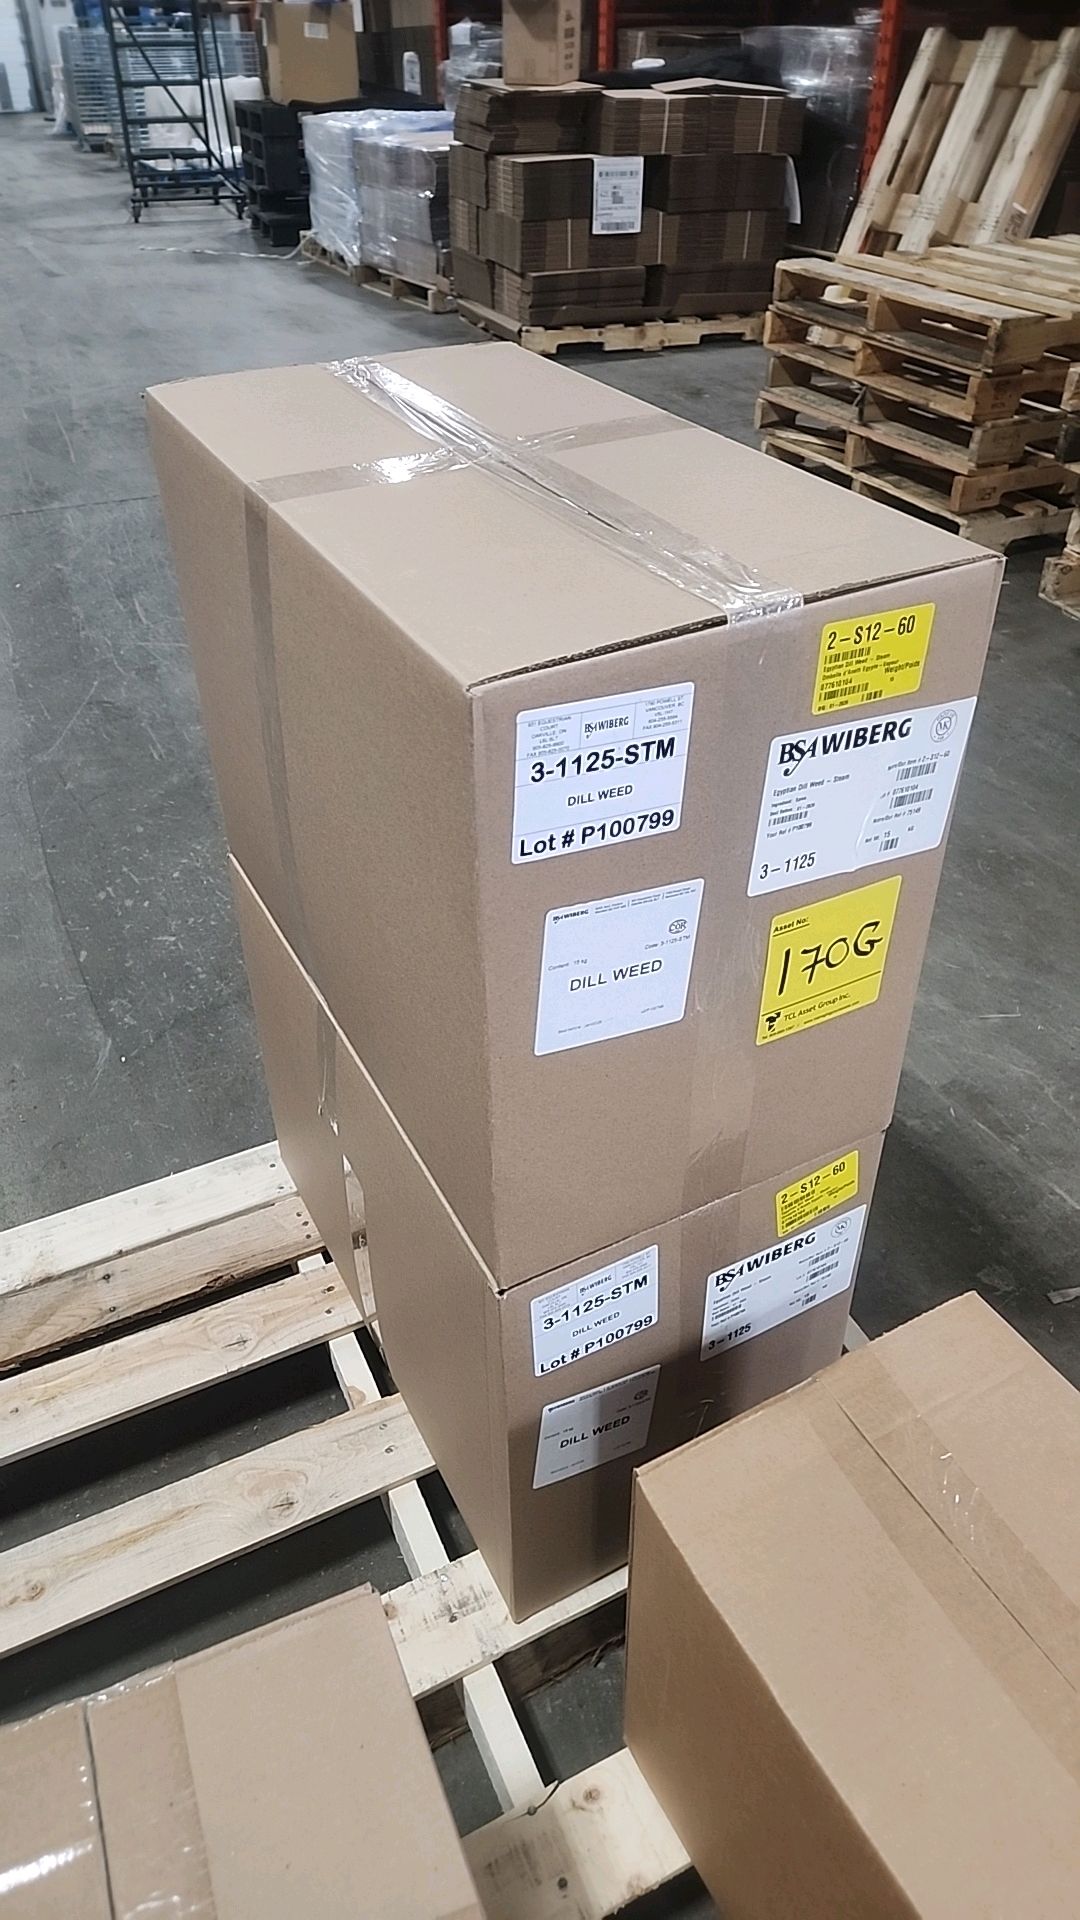 (2 boxes/15 kg ea. = 30 kg) BSA Wiberg steamed dill weed [Loc.Warehouse]